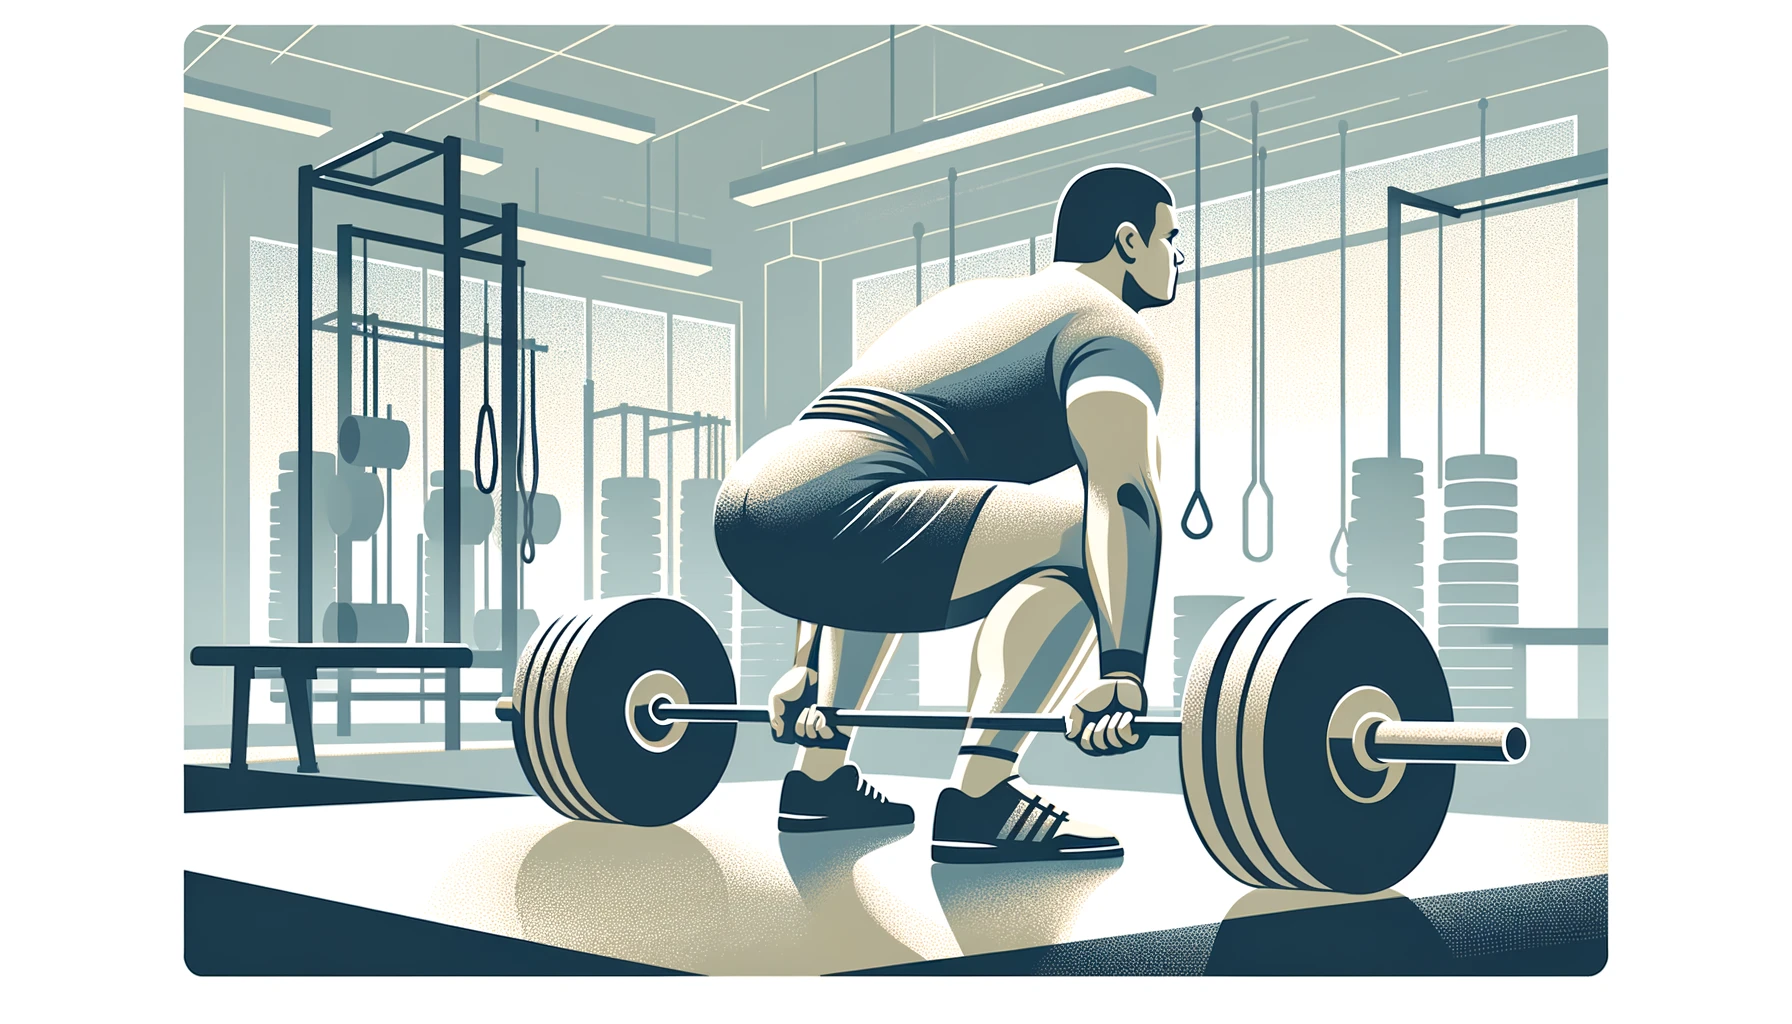 A simple, wide illustration for a blog header, depicting the theme 'Advanced Techniques for Experienced Weightlifters'. The image should feature a person of ambiguous gender, appearing as an experienced athlete, performing a complex weightlifting maneuver such as a deadlift or squat with heavy weights. The setting should be a professional gym environment, rendered in a minimalistic style with subtle, motivating colors to convey a sense of advanced training. The illustration should emphasize the sophistication and intensity of high-level strength training.